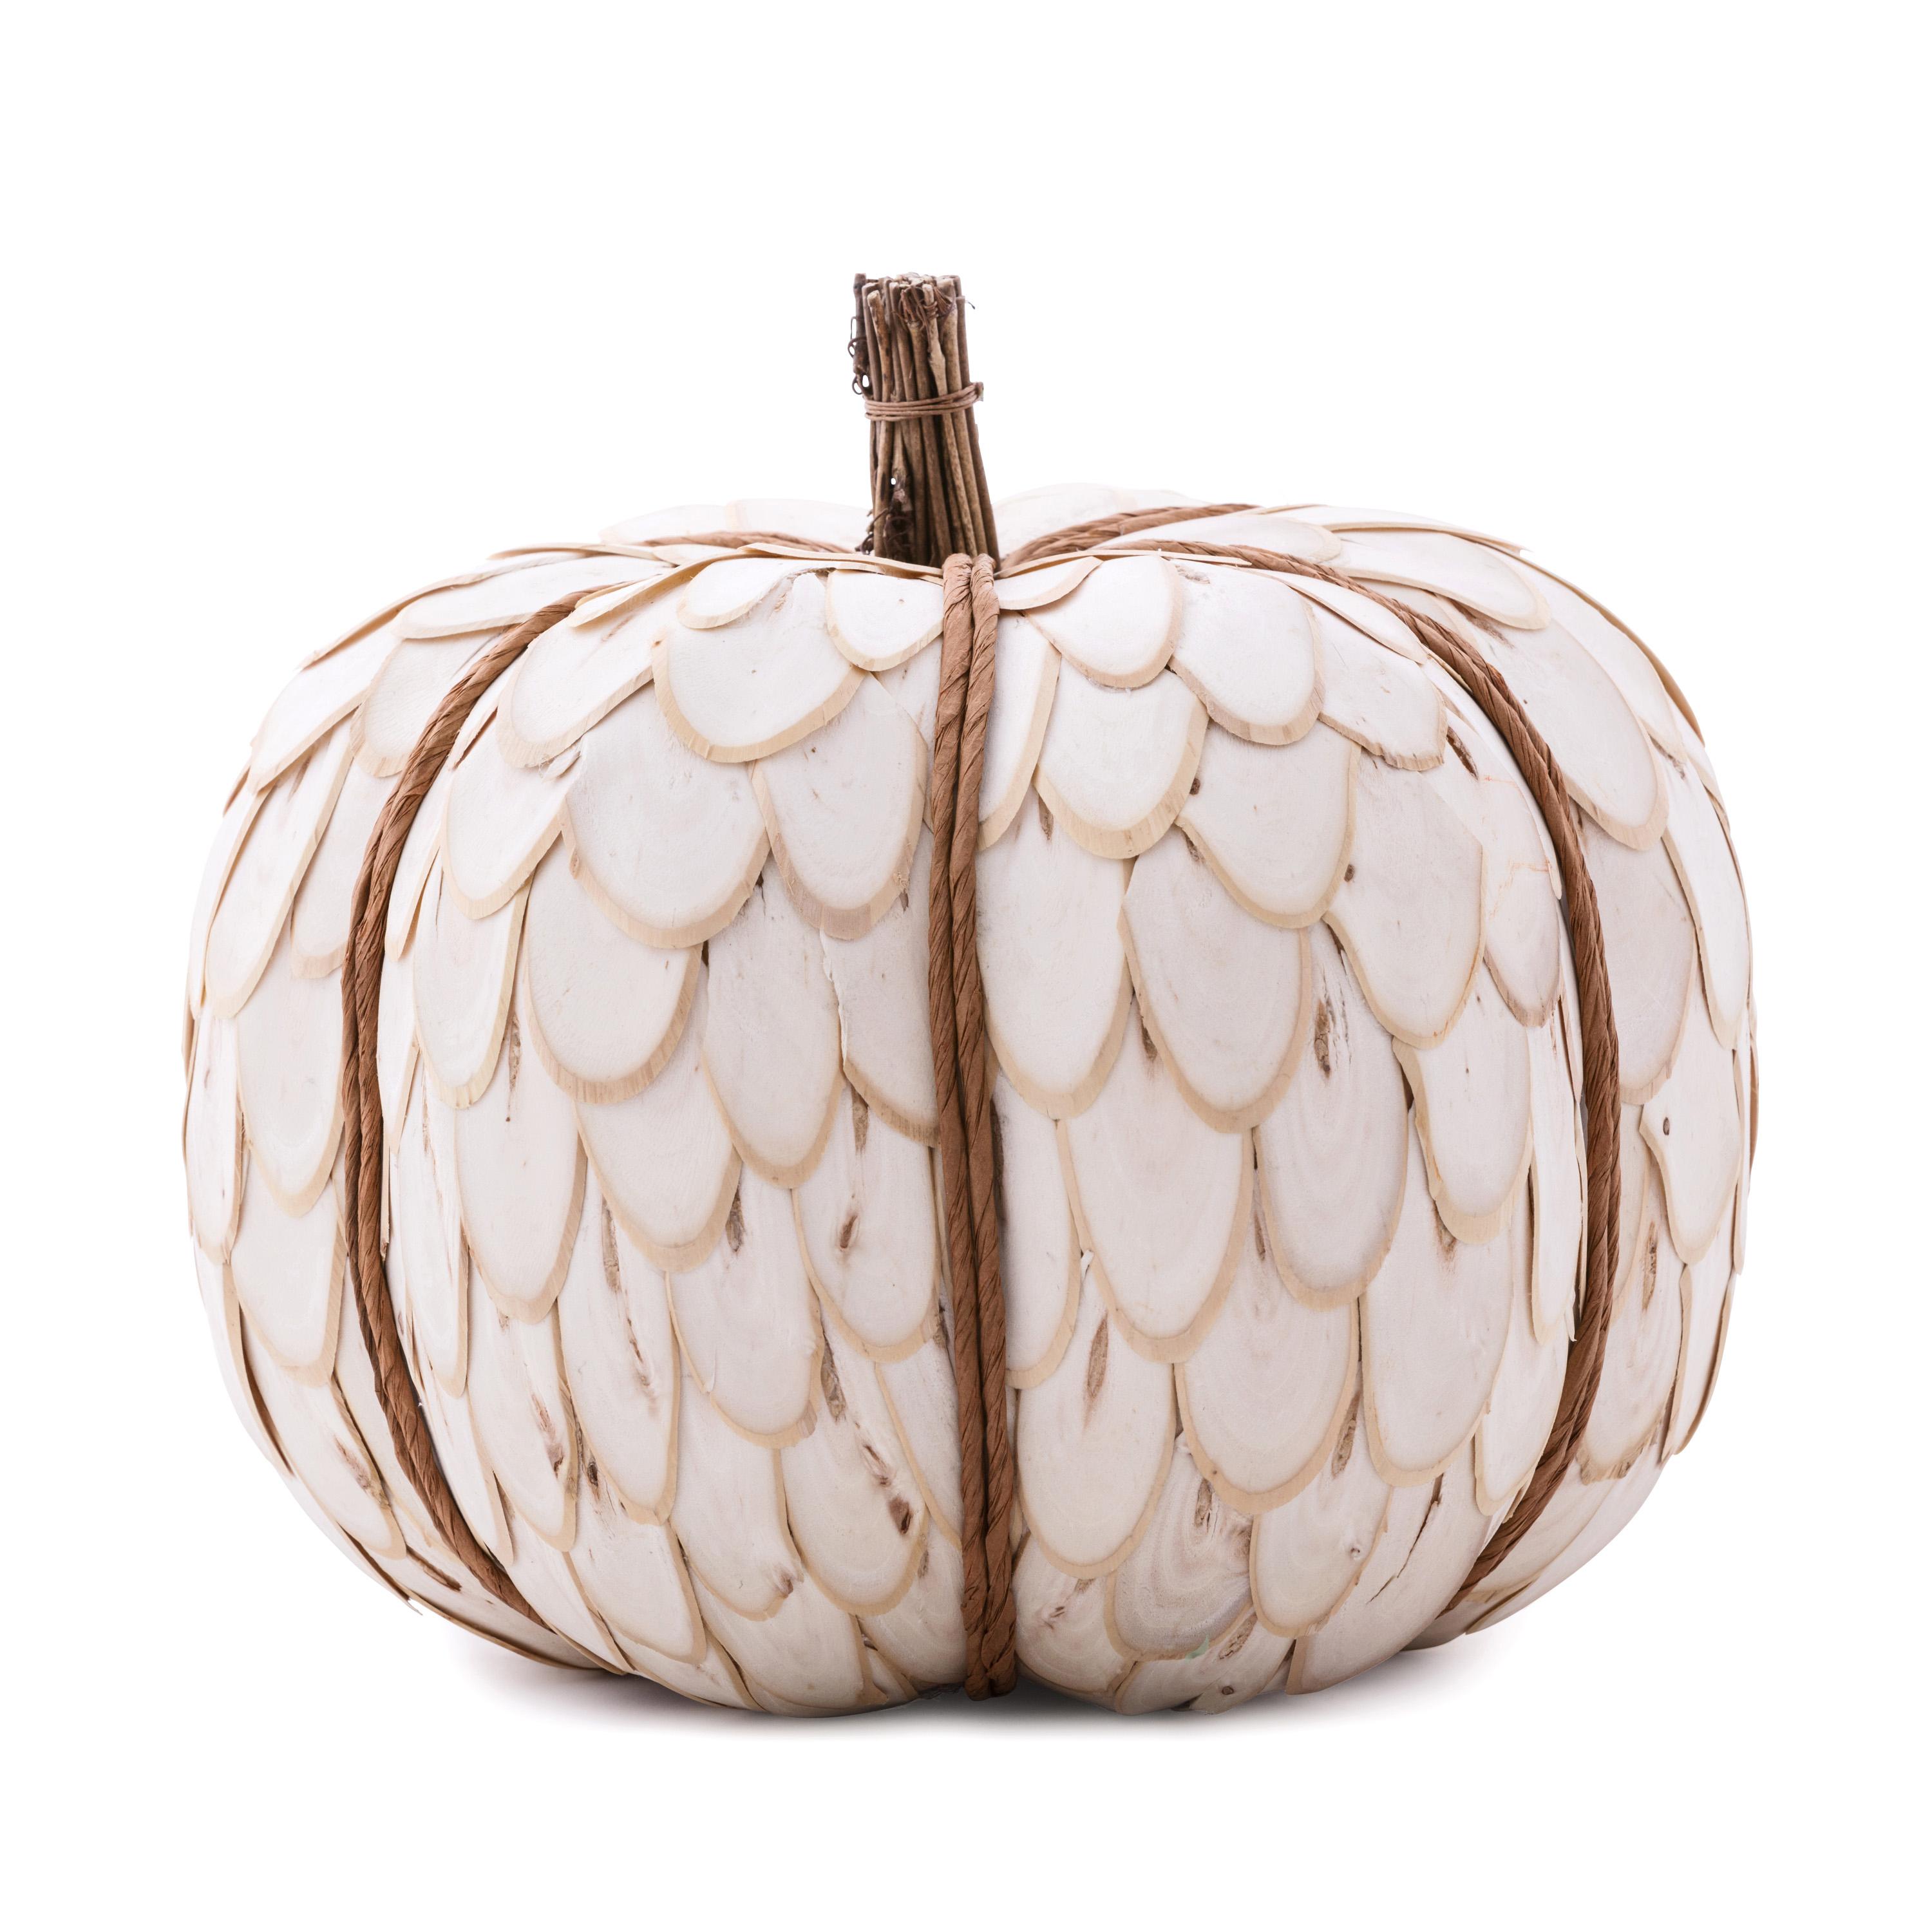 Right at Home: No-carve Halloween pumpkins with style | The ...